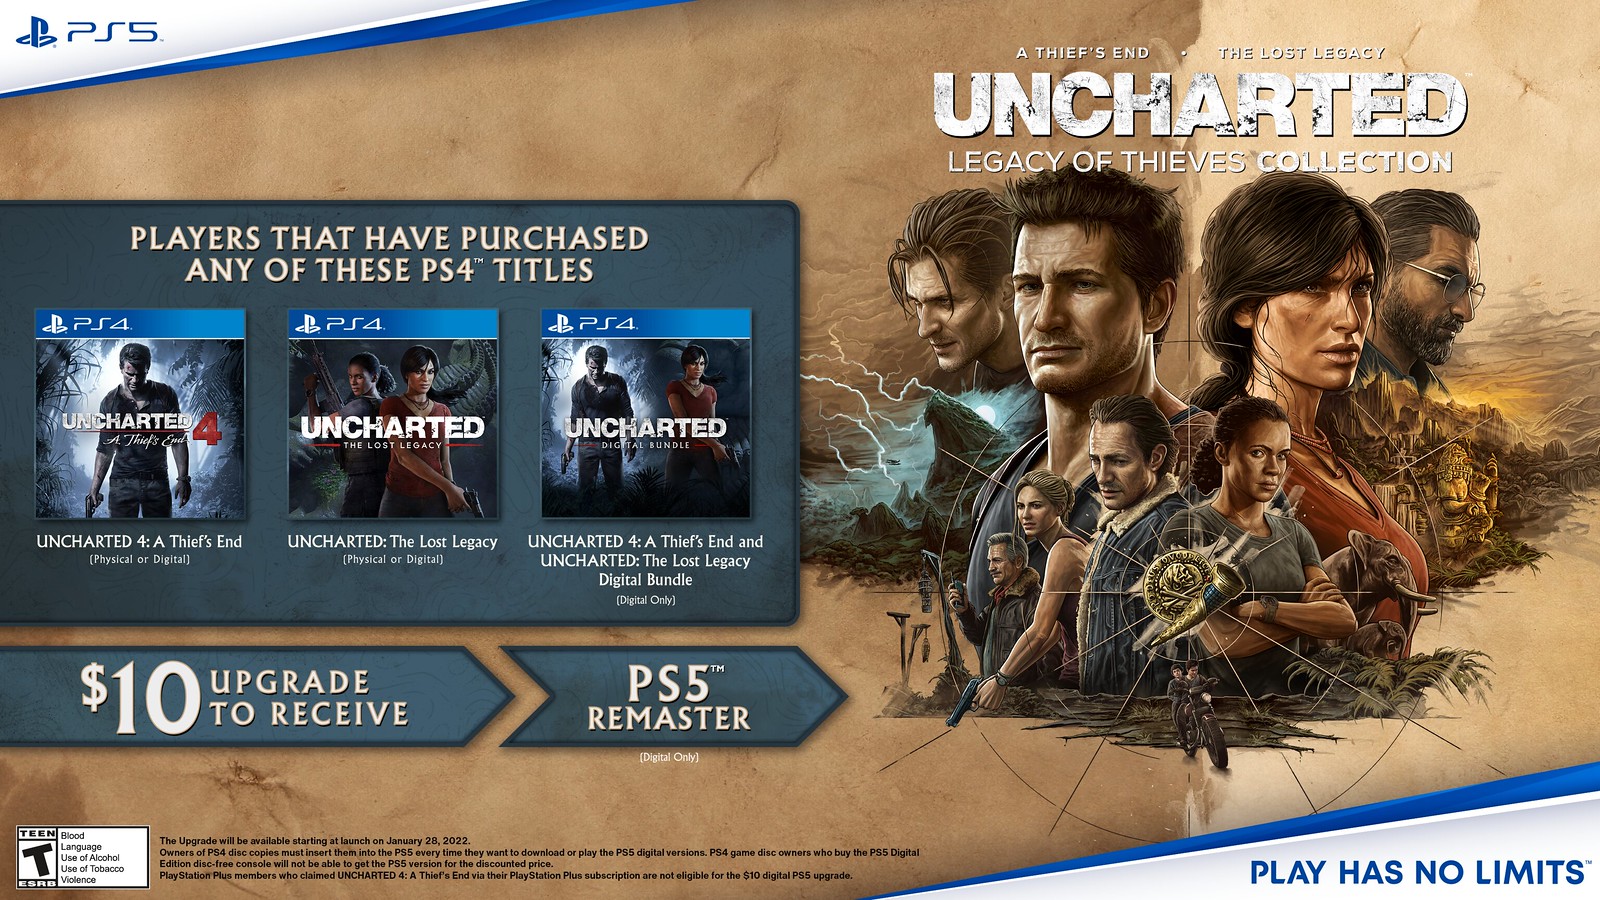 Uncharted Legacy of Thieves Collection releases on PC on October